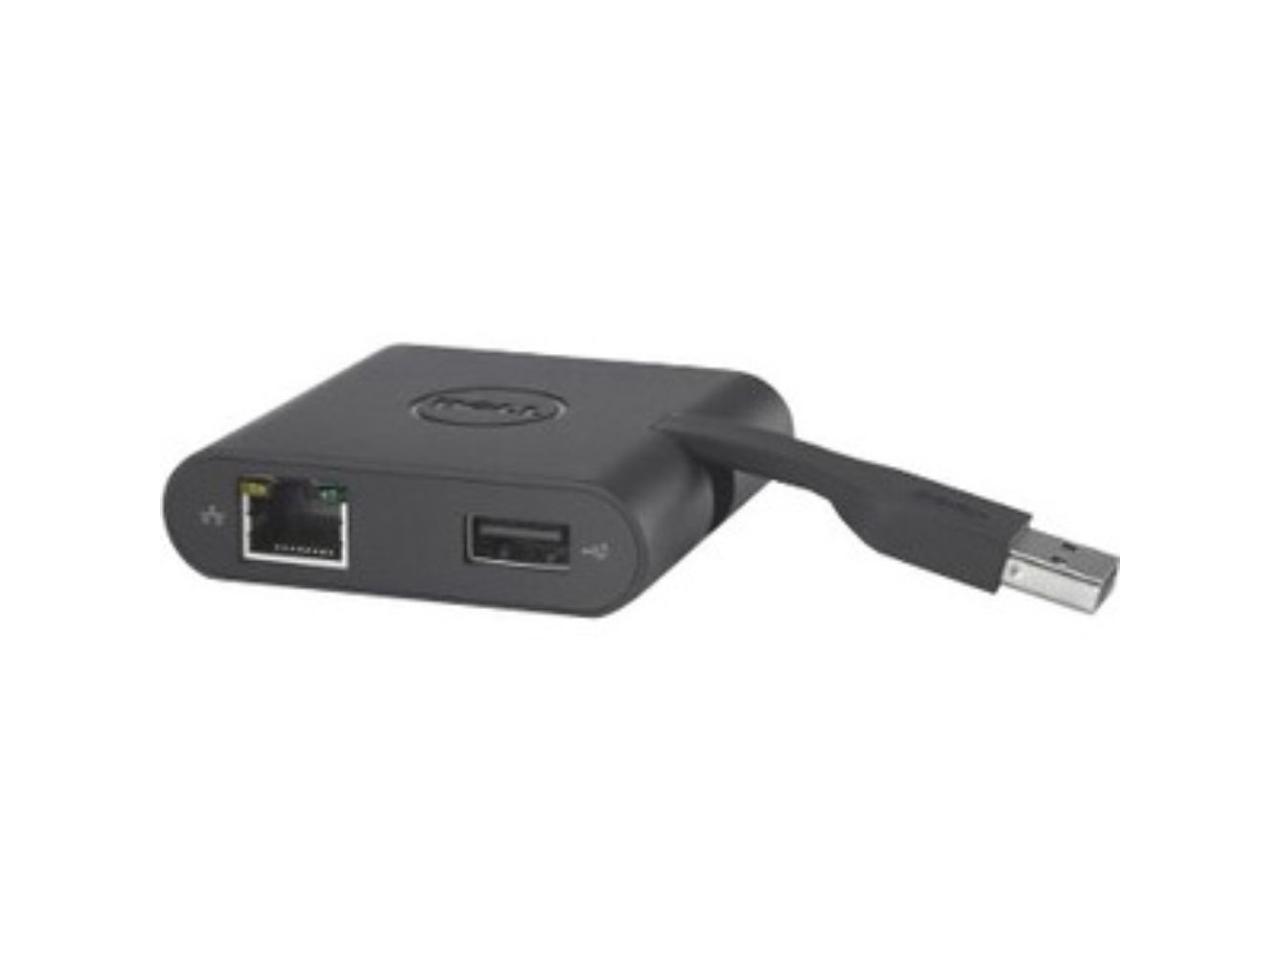 USB-C to USB-A 3.0 Dell Adapter